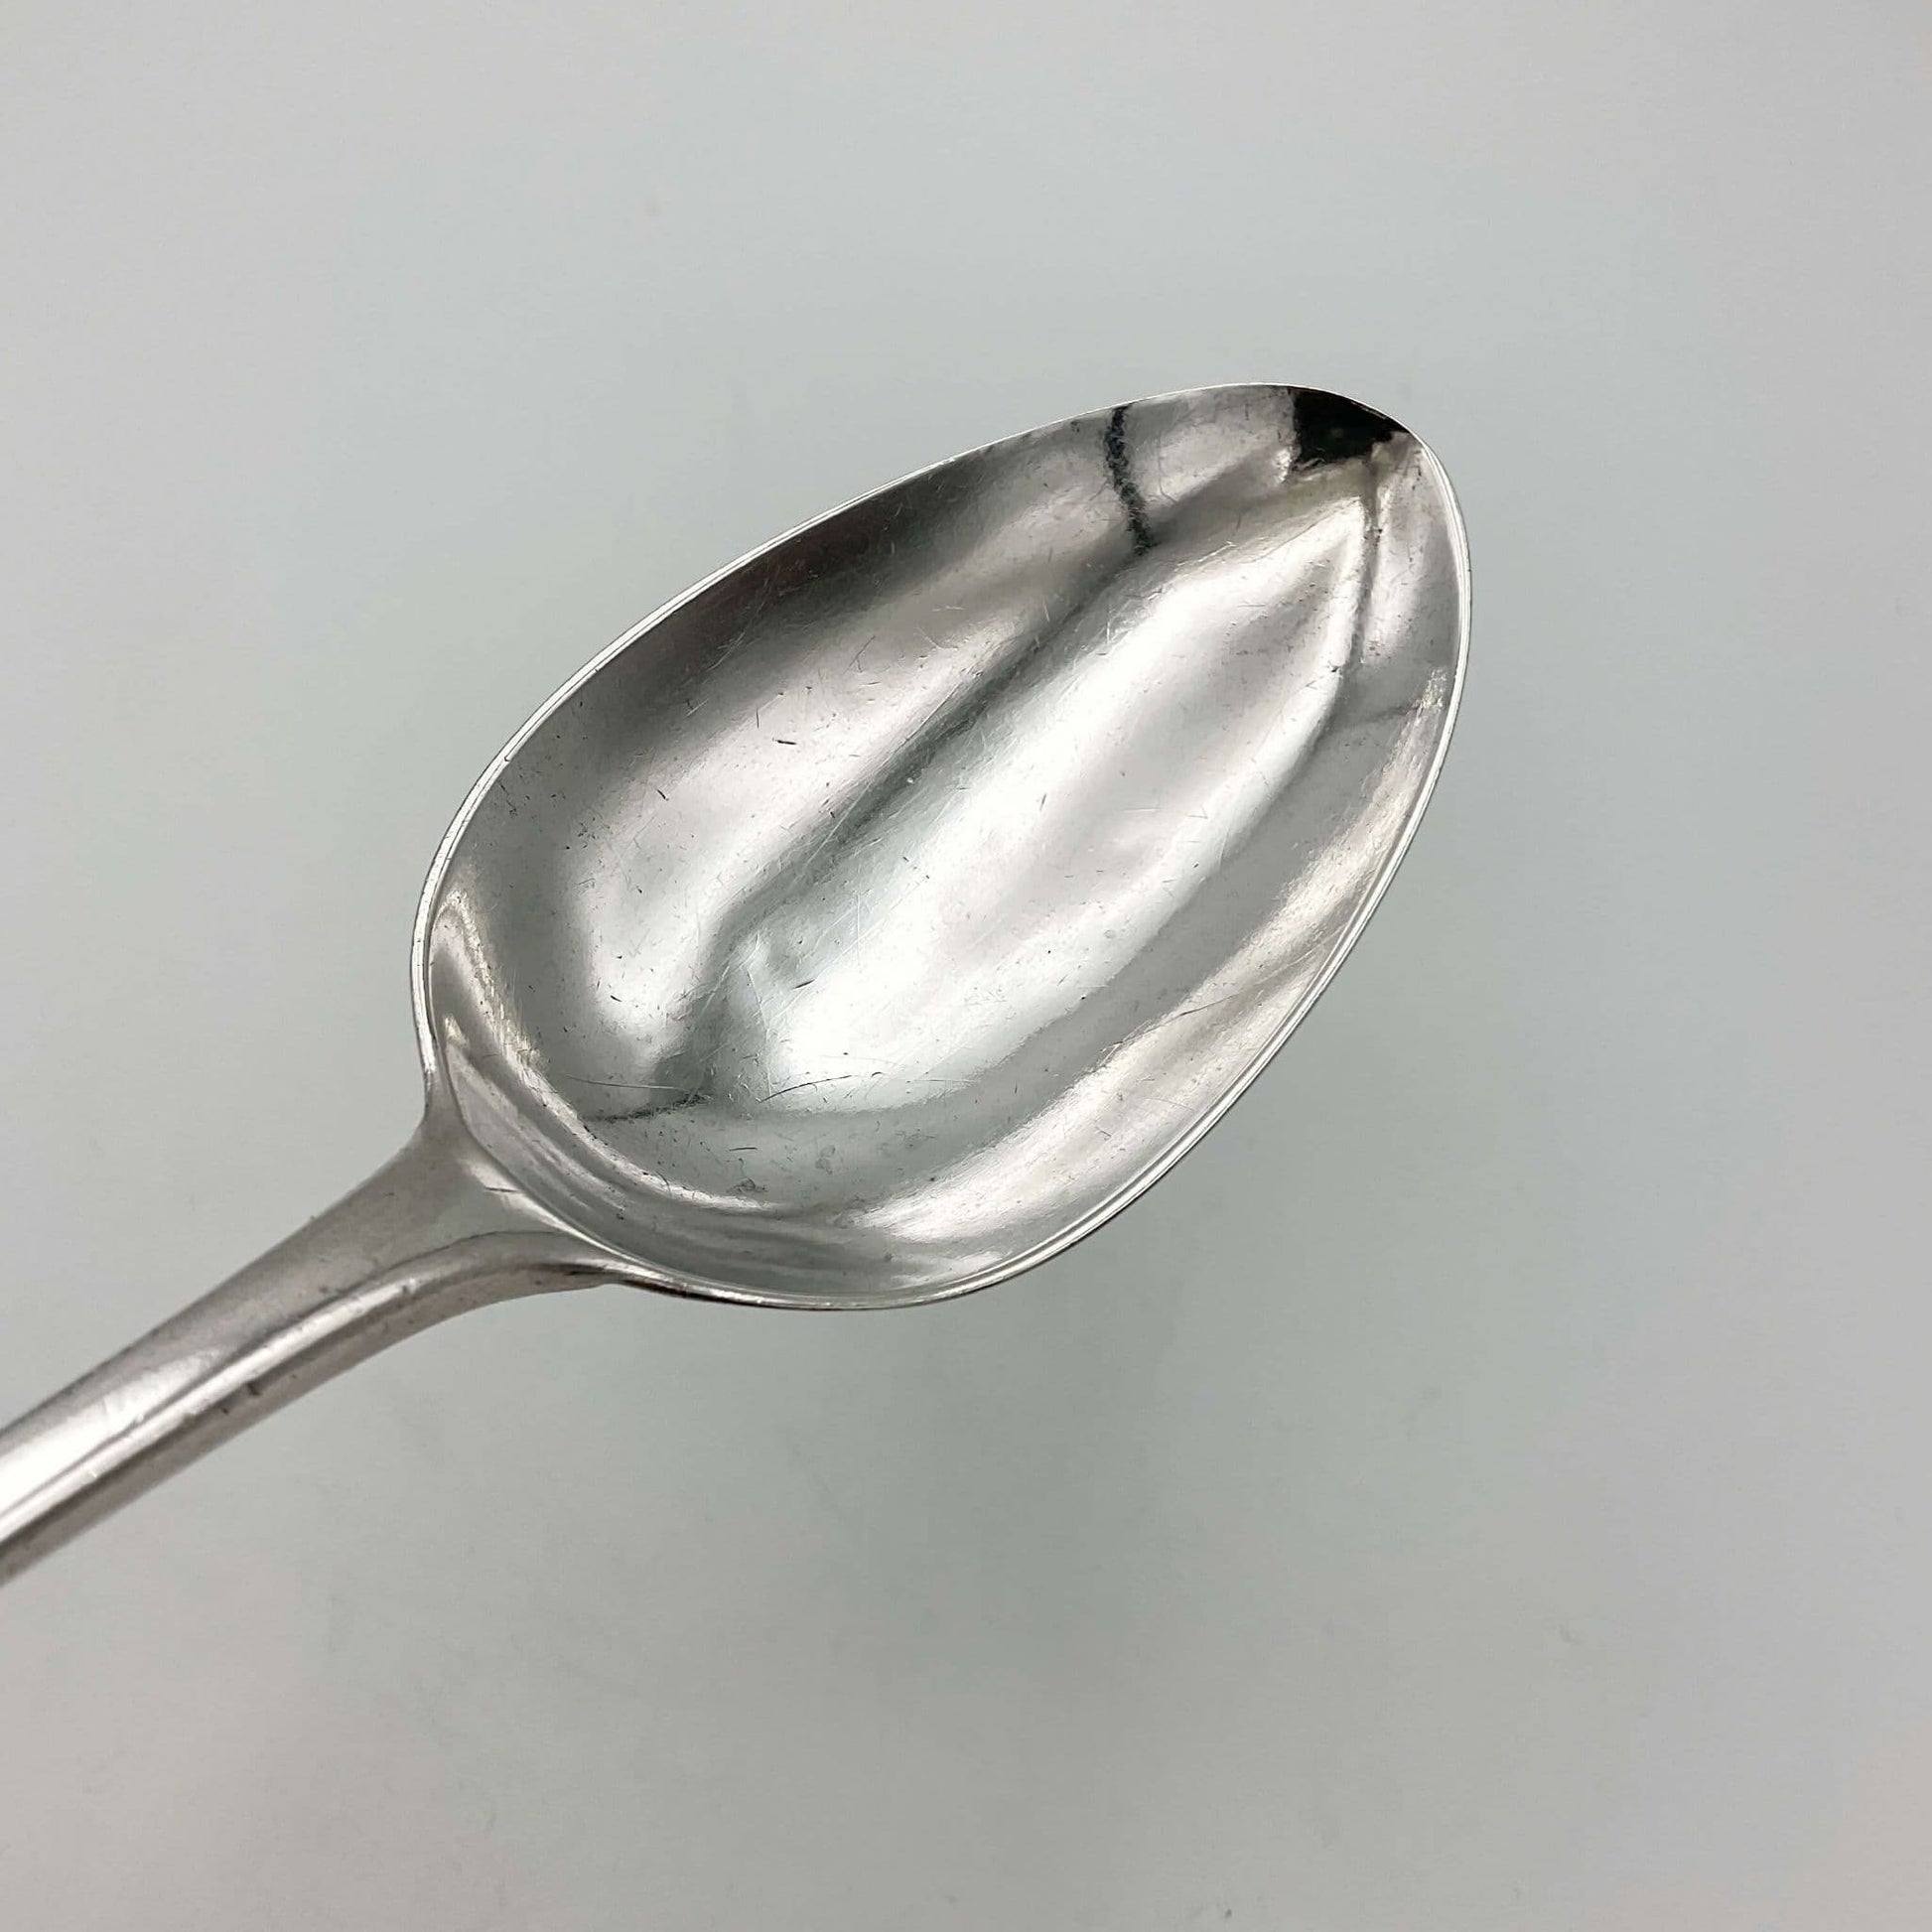 lovely silver bowl of serving spoon on white background